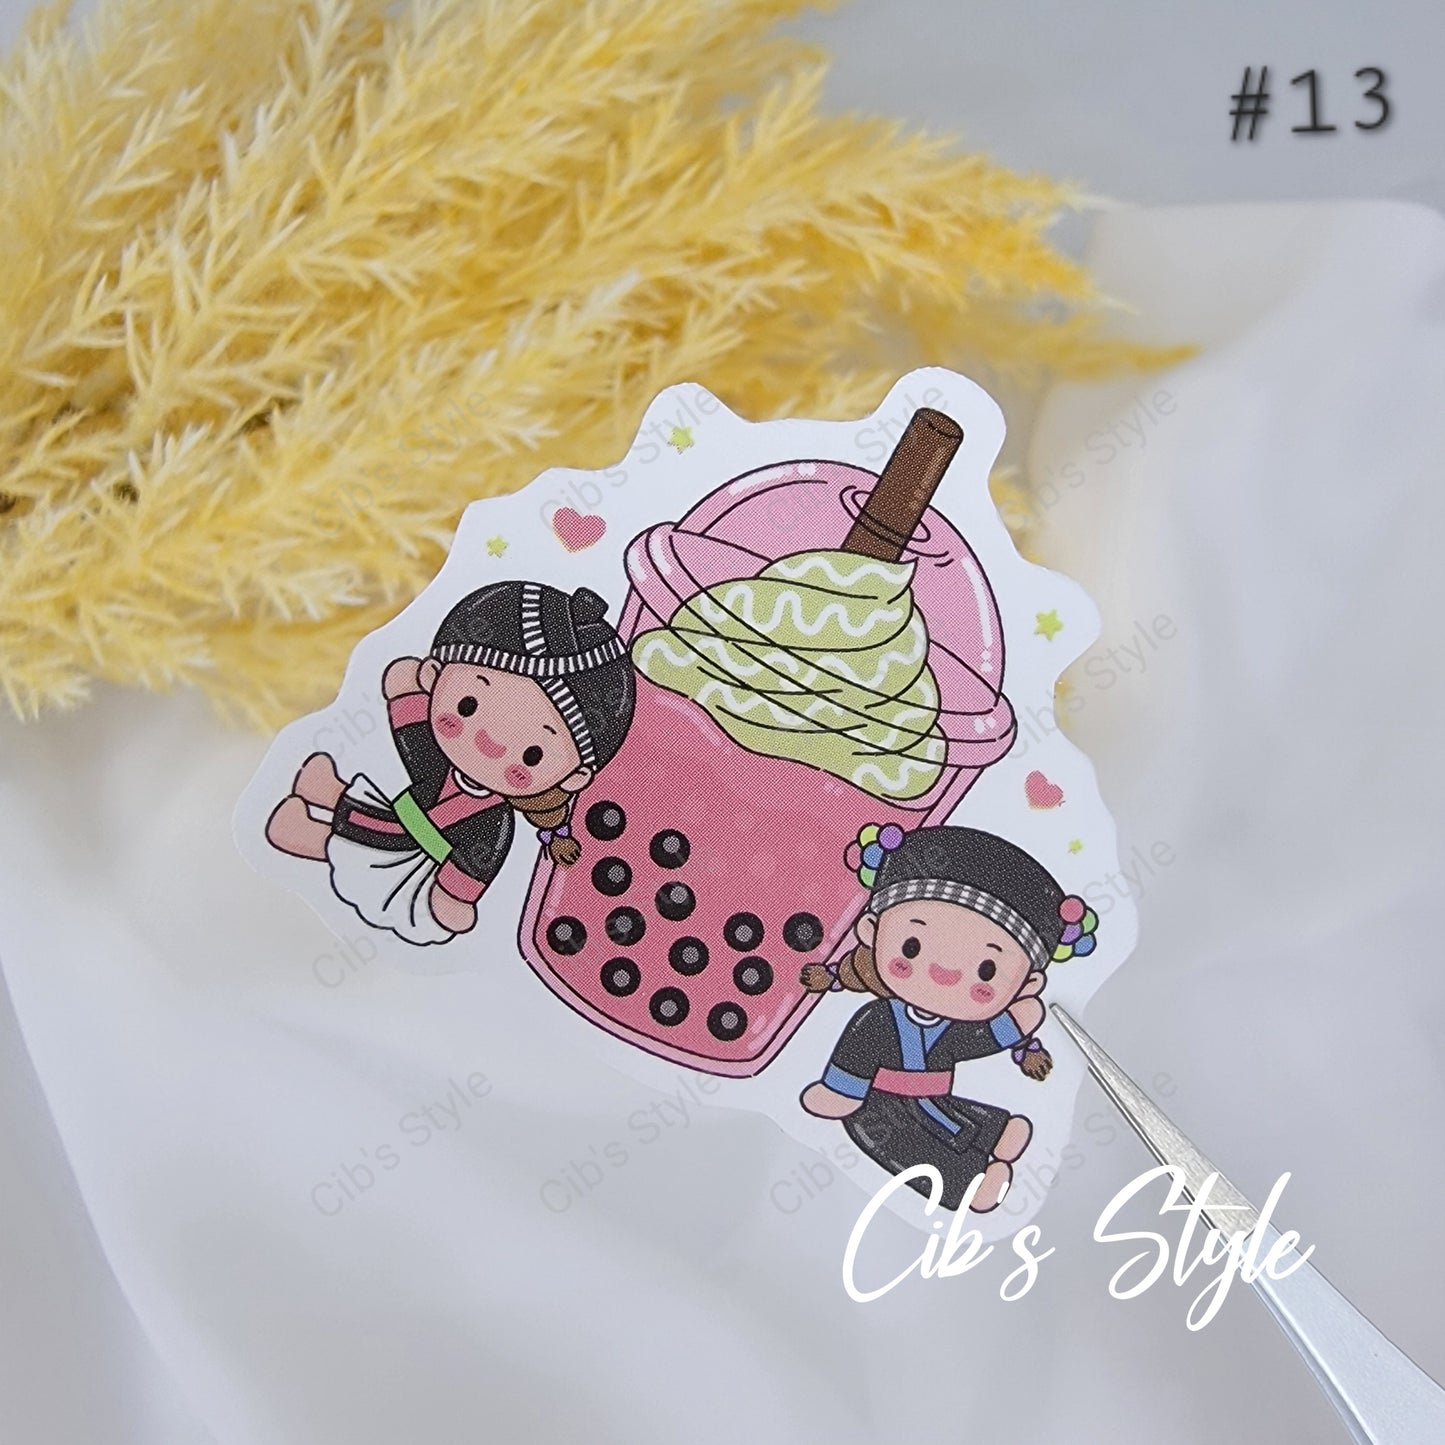 Hmong Boba & Foods Stickers (35 different style)